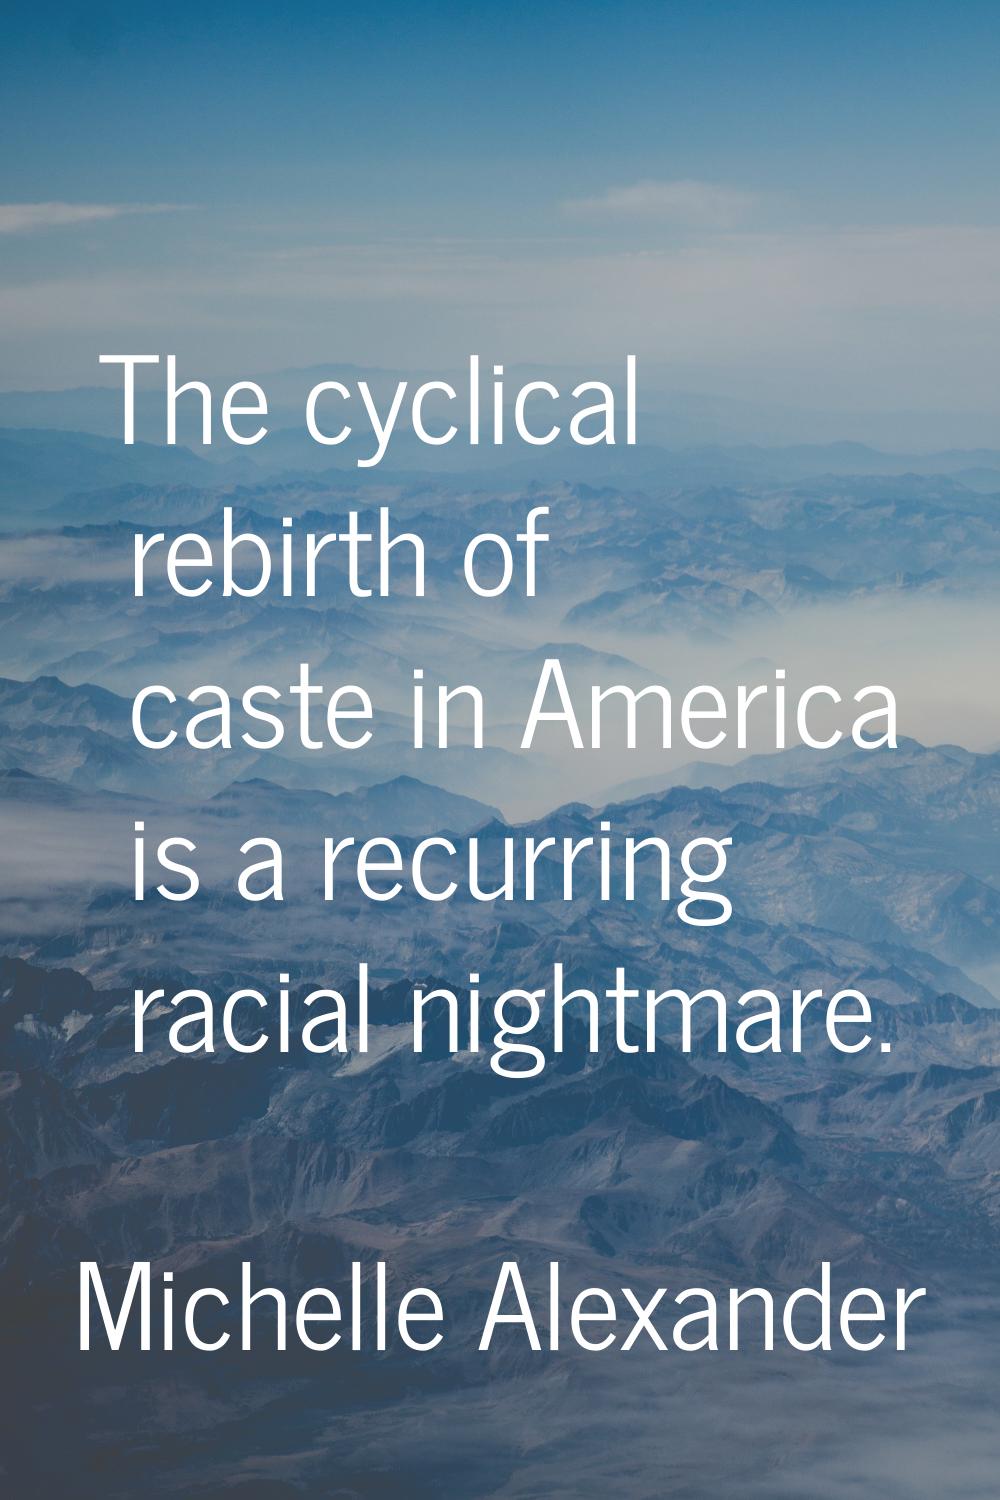 The cyclical rebirth of caste in America is a recurring racial nightmare.